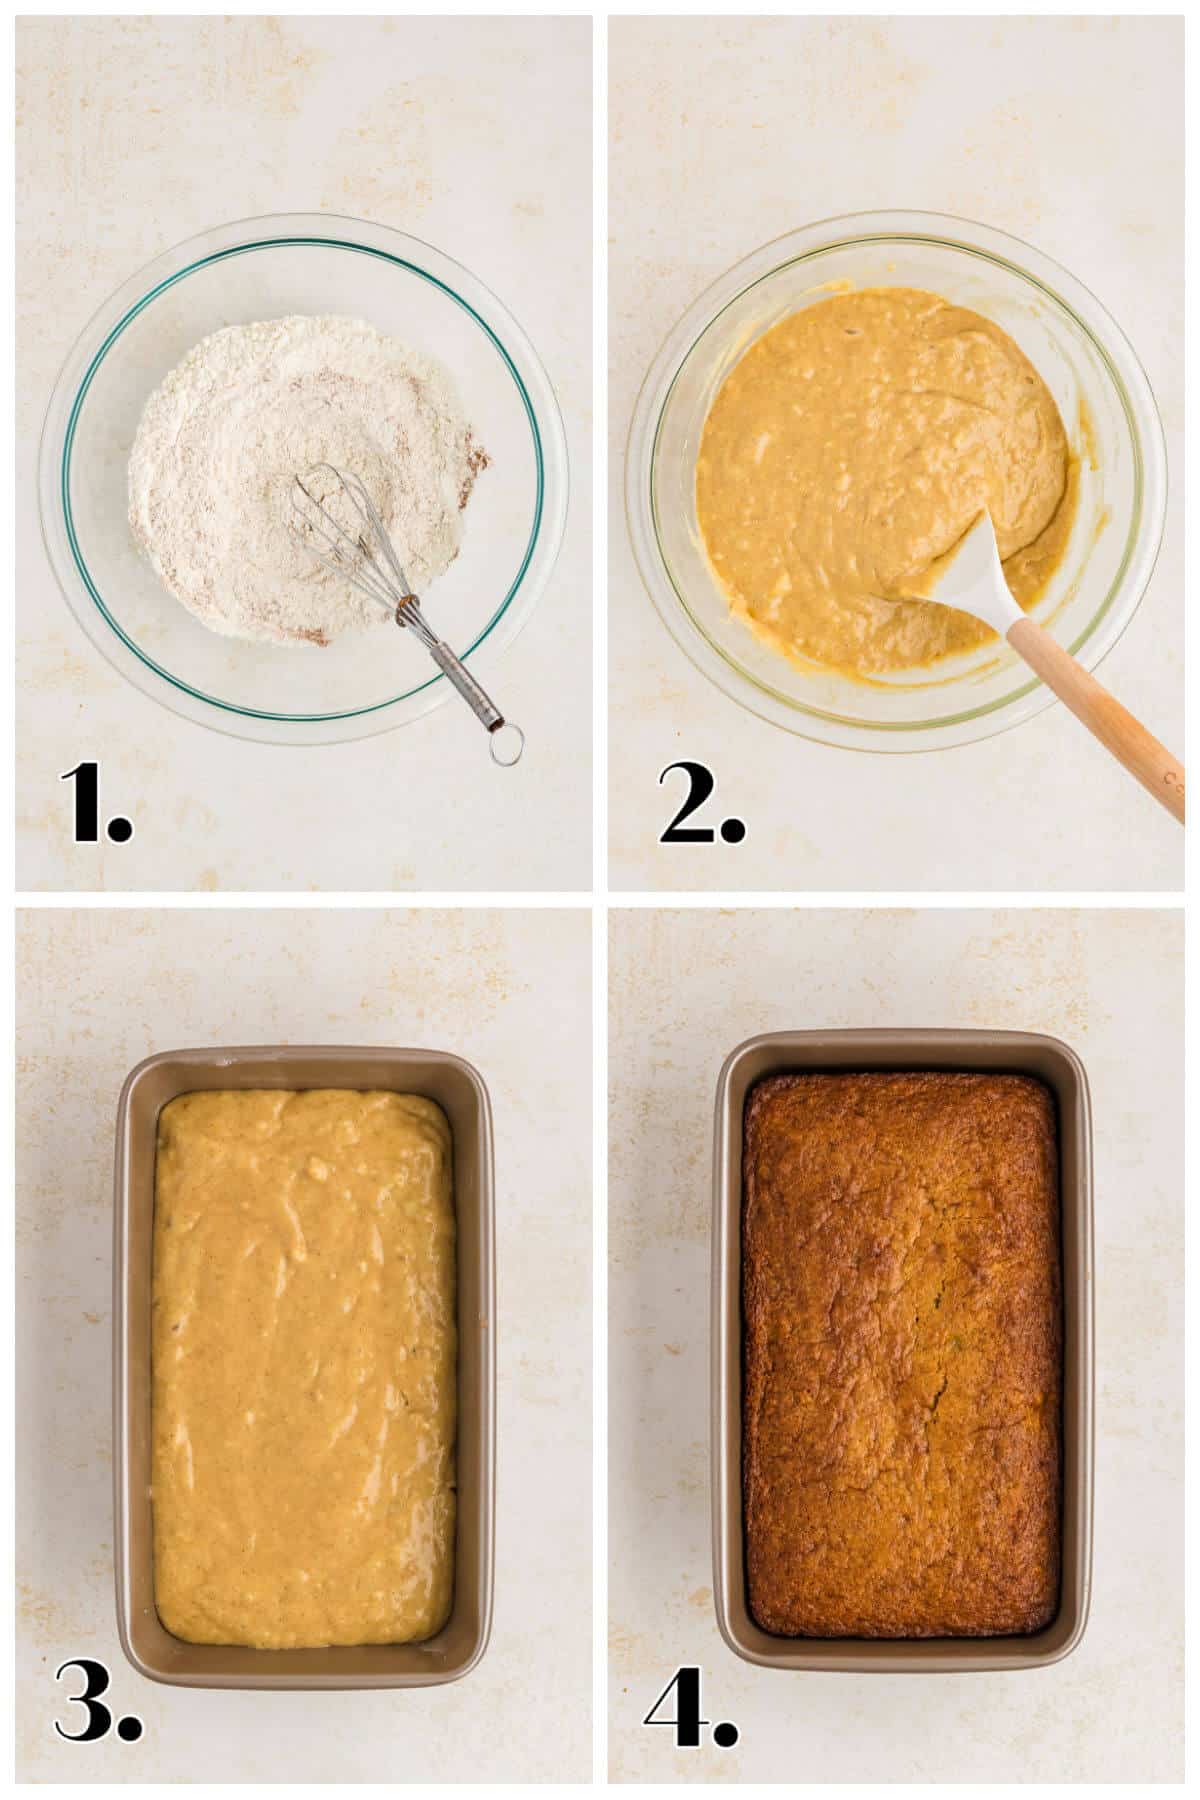 4-image collage showing the steps to make sourdough banana bread.